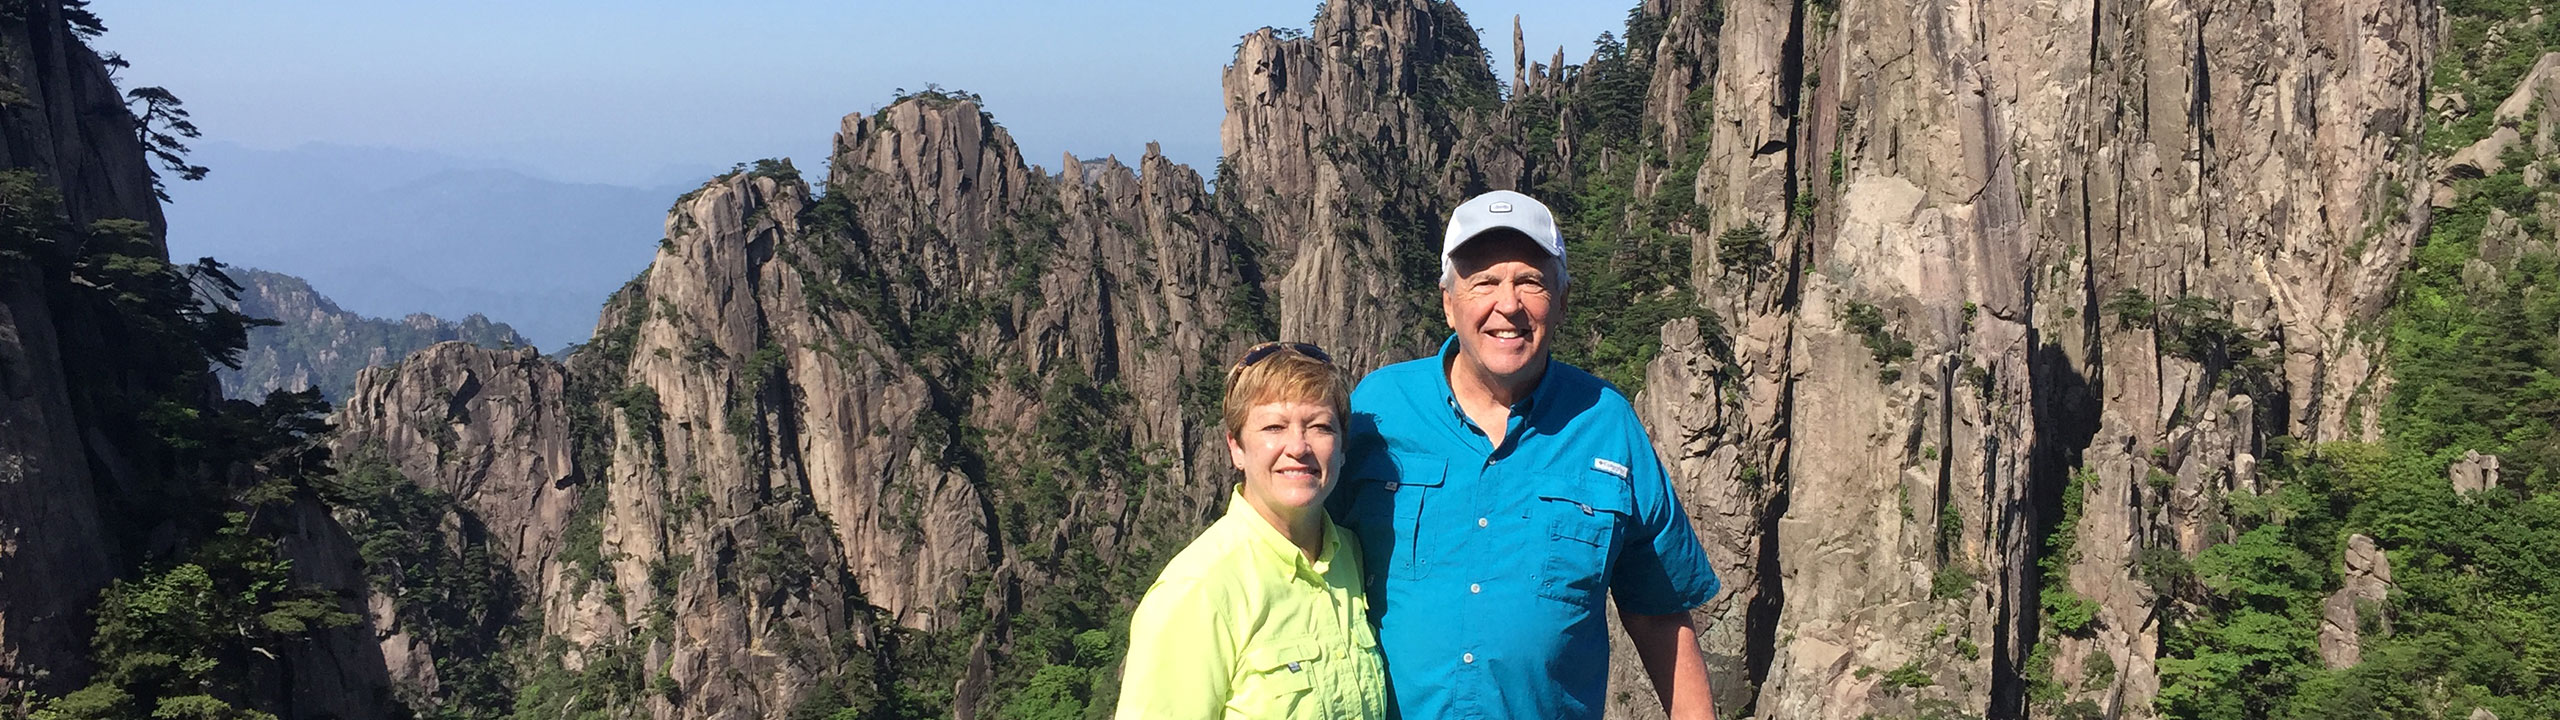 Eric and Teri from America Tailor-made a China Tour to Beijing, Xian, and Shanghai.